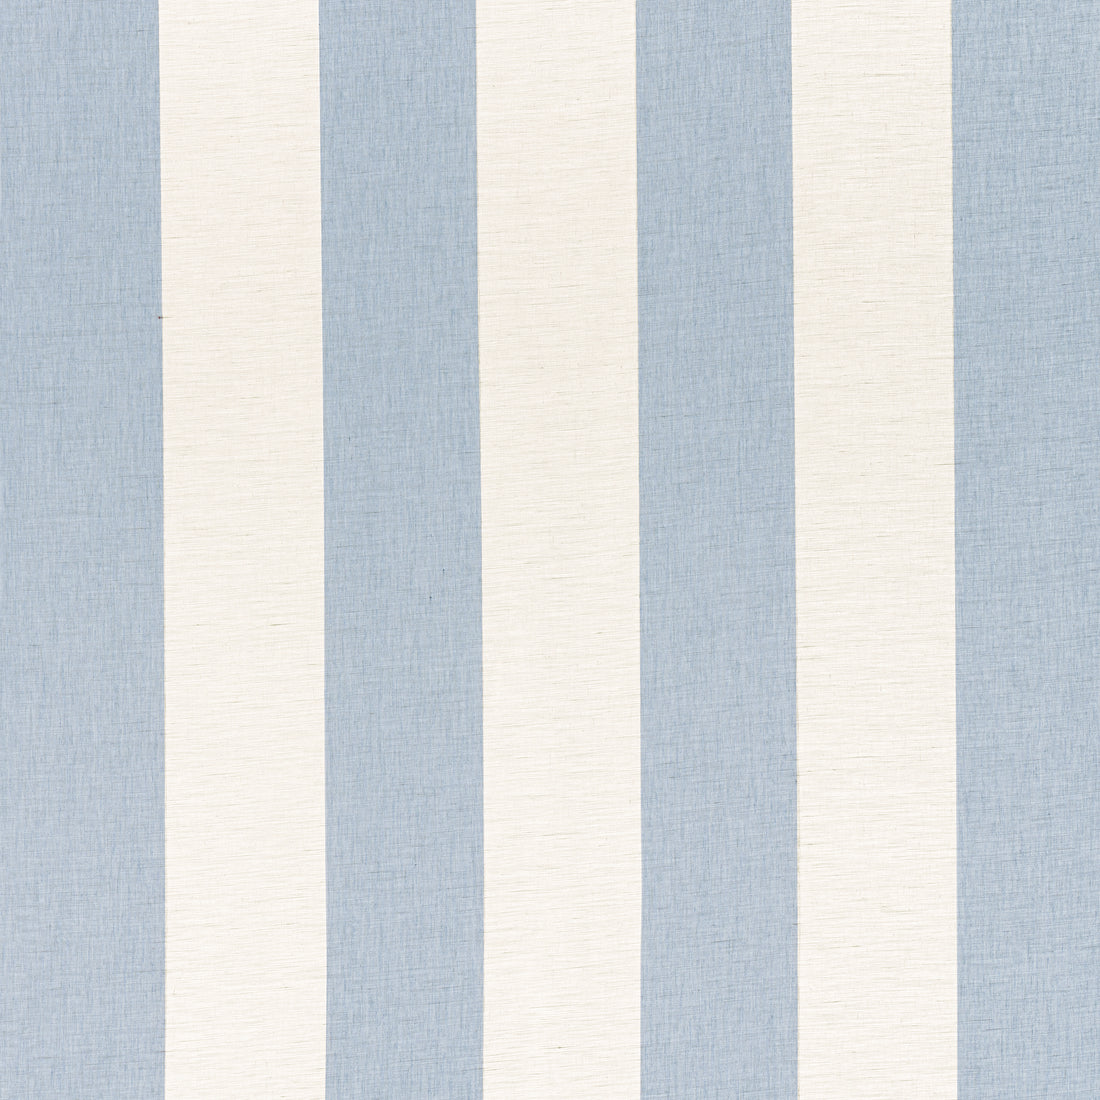 Newport Stripe fabric in navy and linen color - pattern number FWW8211 - by Thibaut in the Aura collection